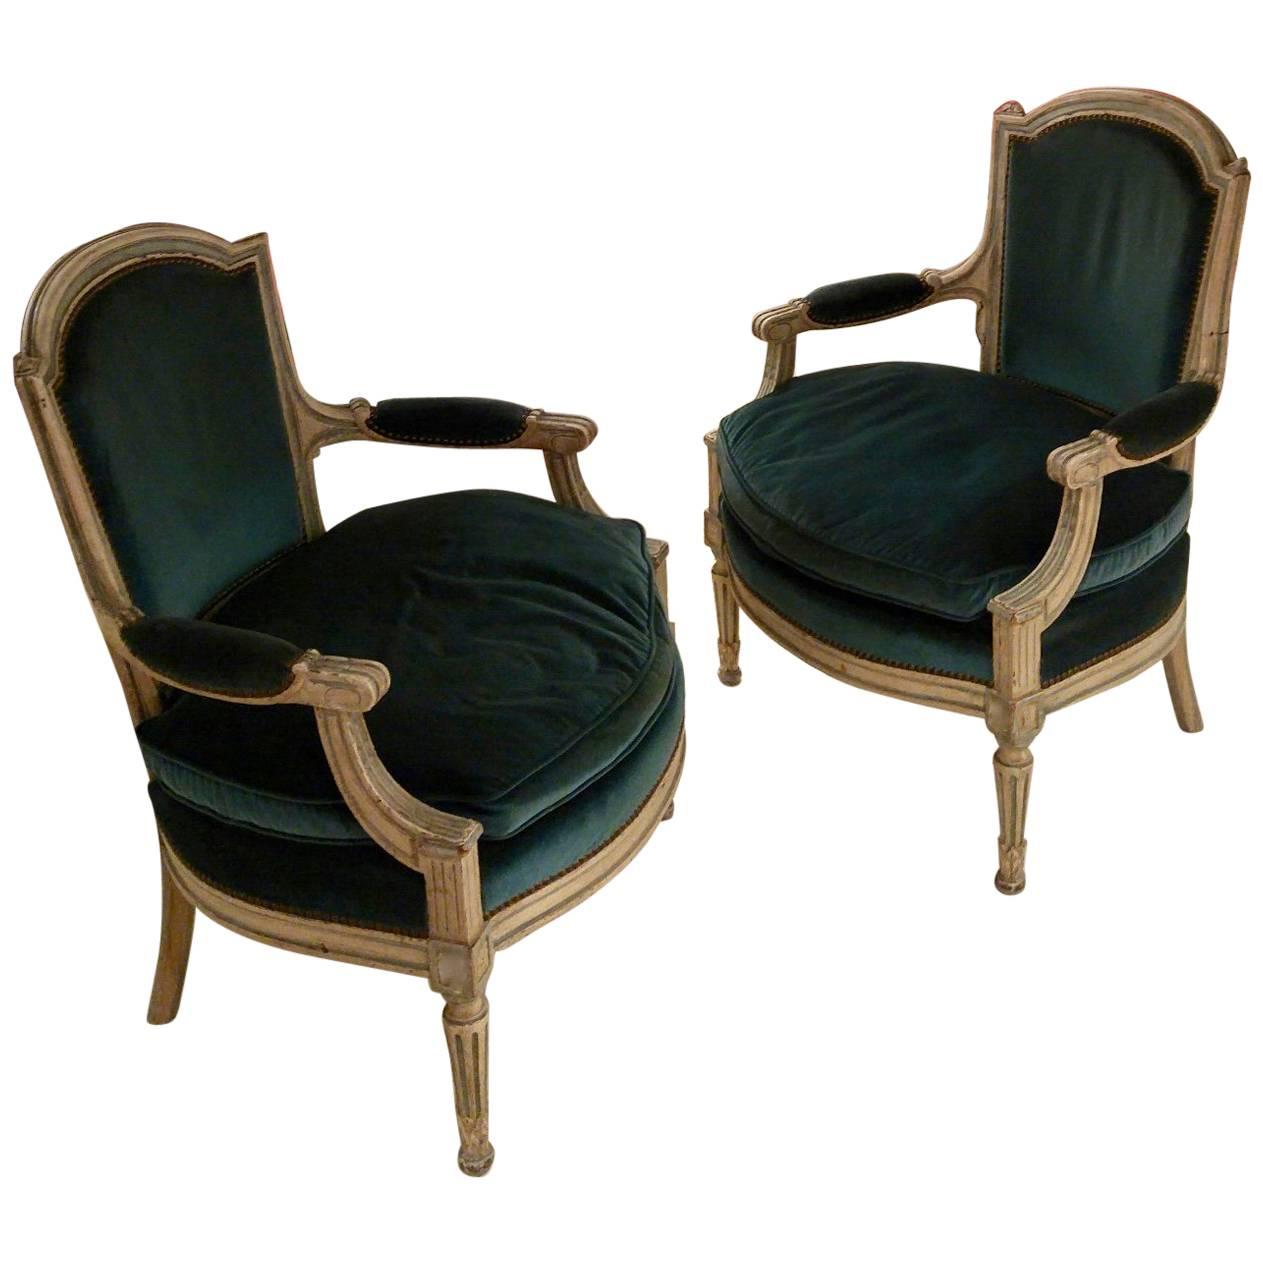 Elegant Pair of Armchairs in the Style of Louis XVI by Maison Jansen